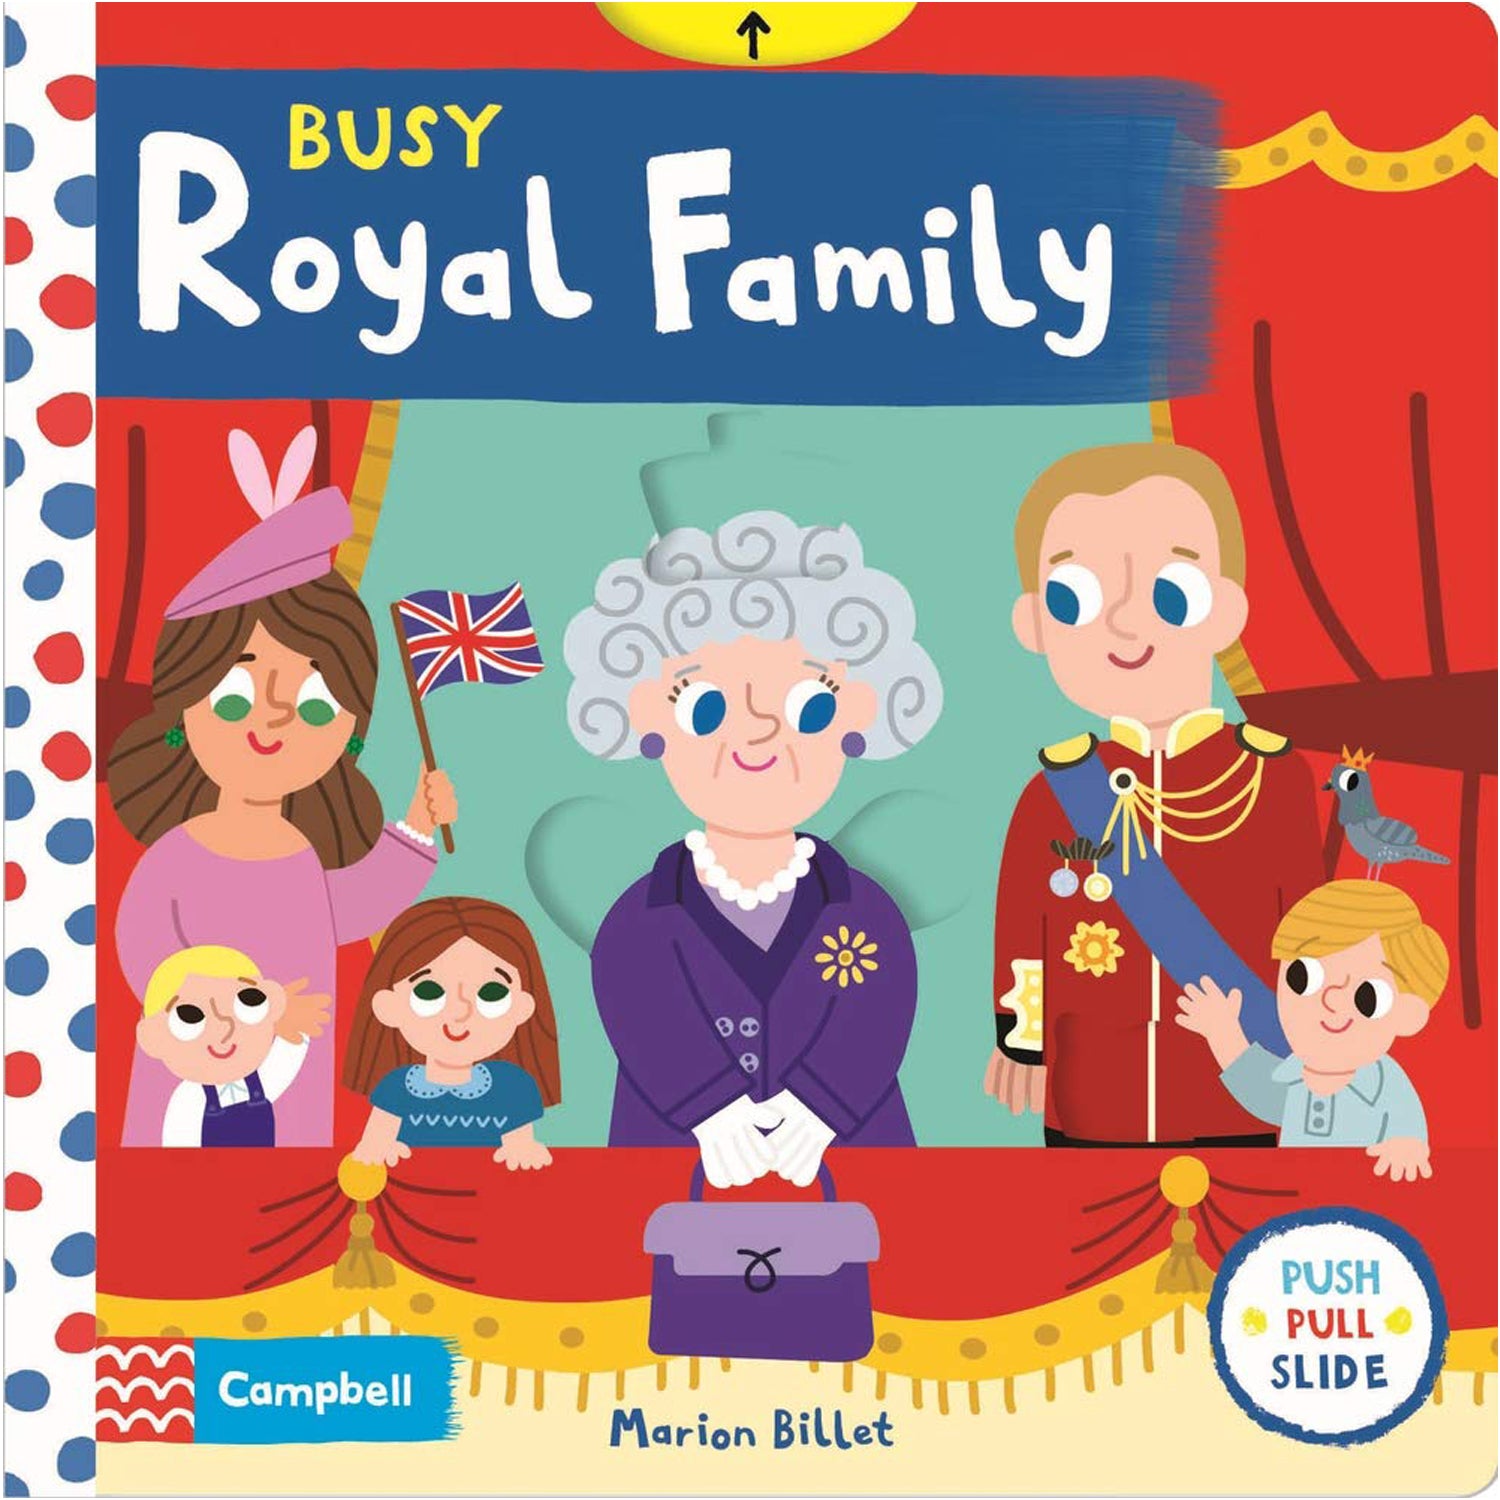 Busy Royal Family Book by Marion Billet 1